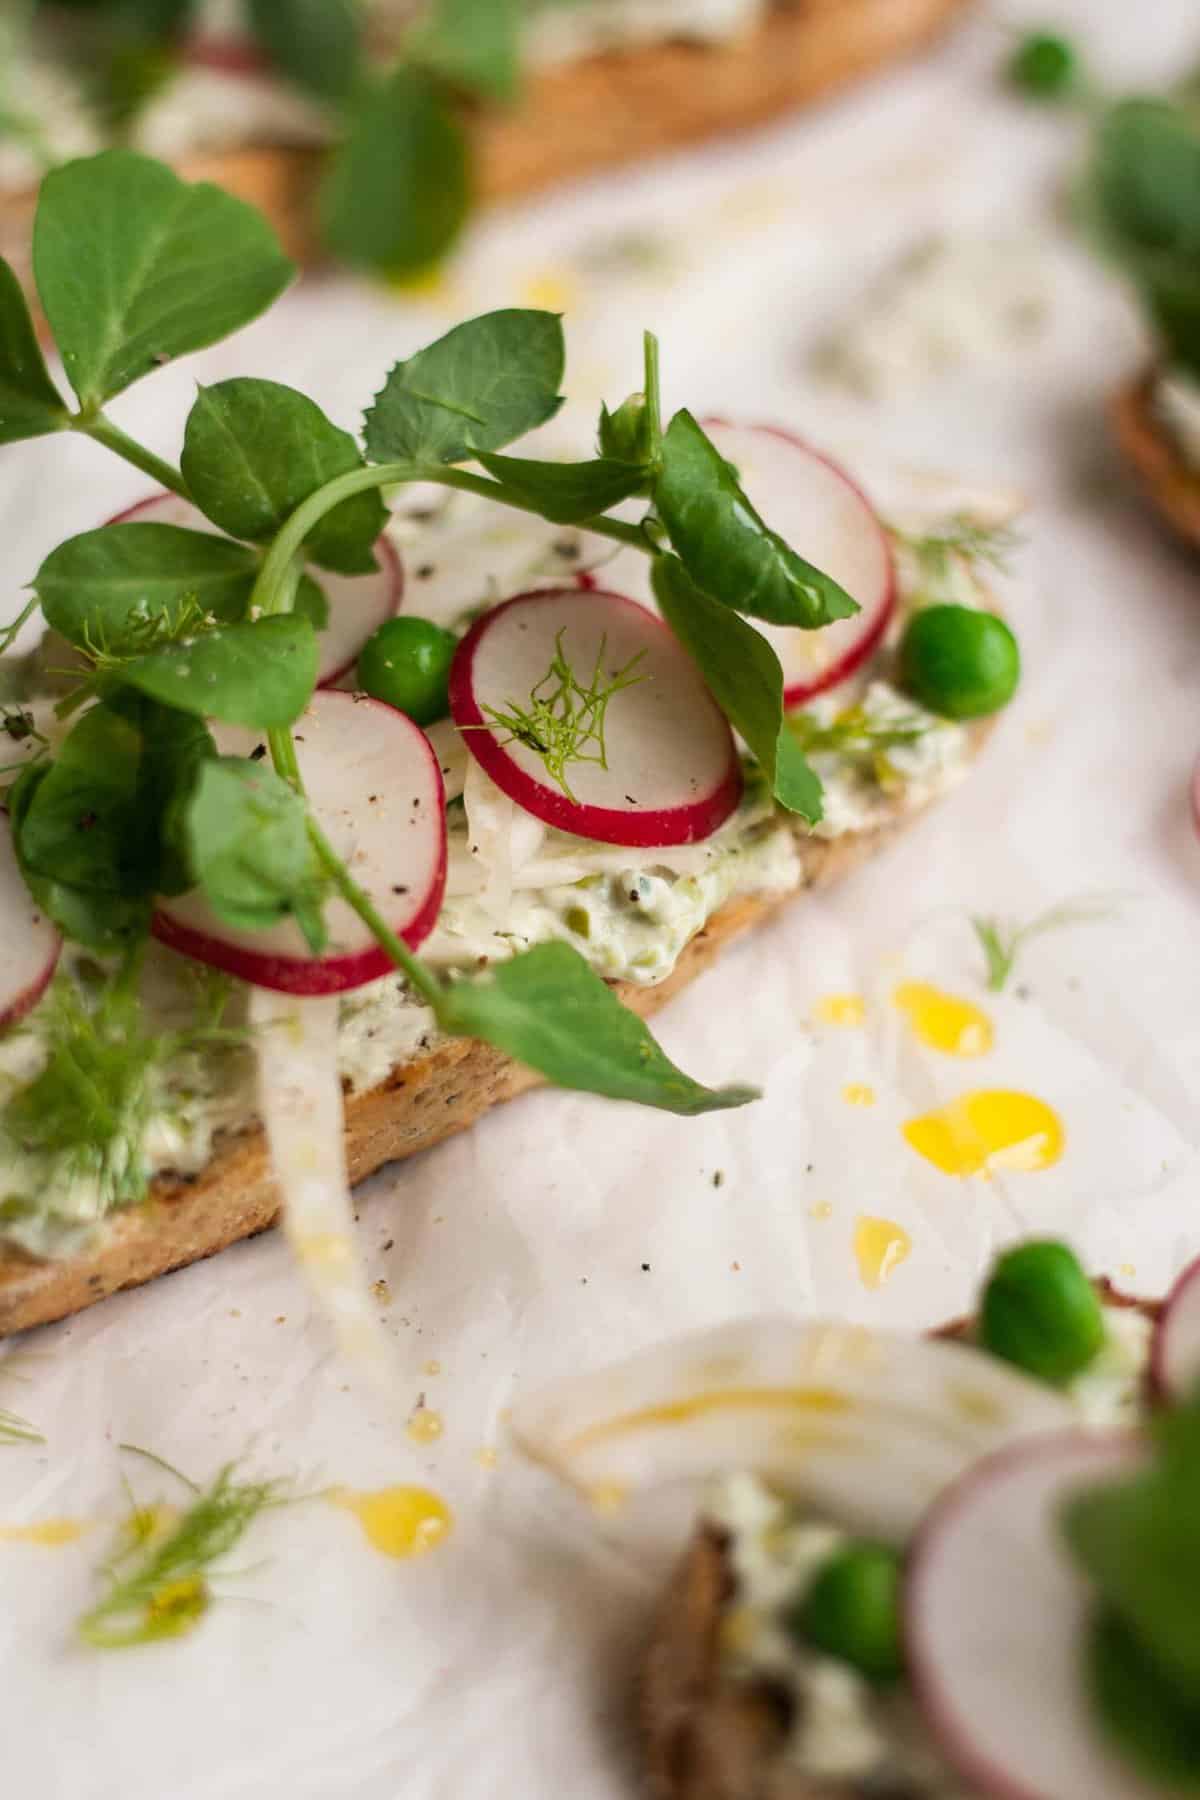 A crostini with radish and peashoots and oil.